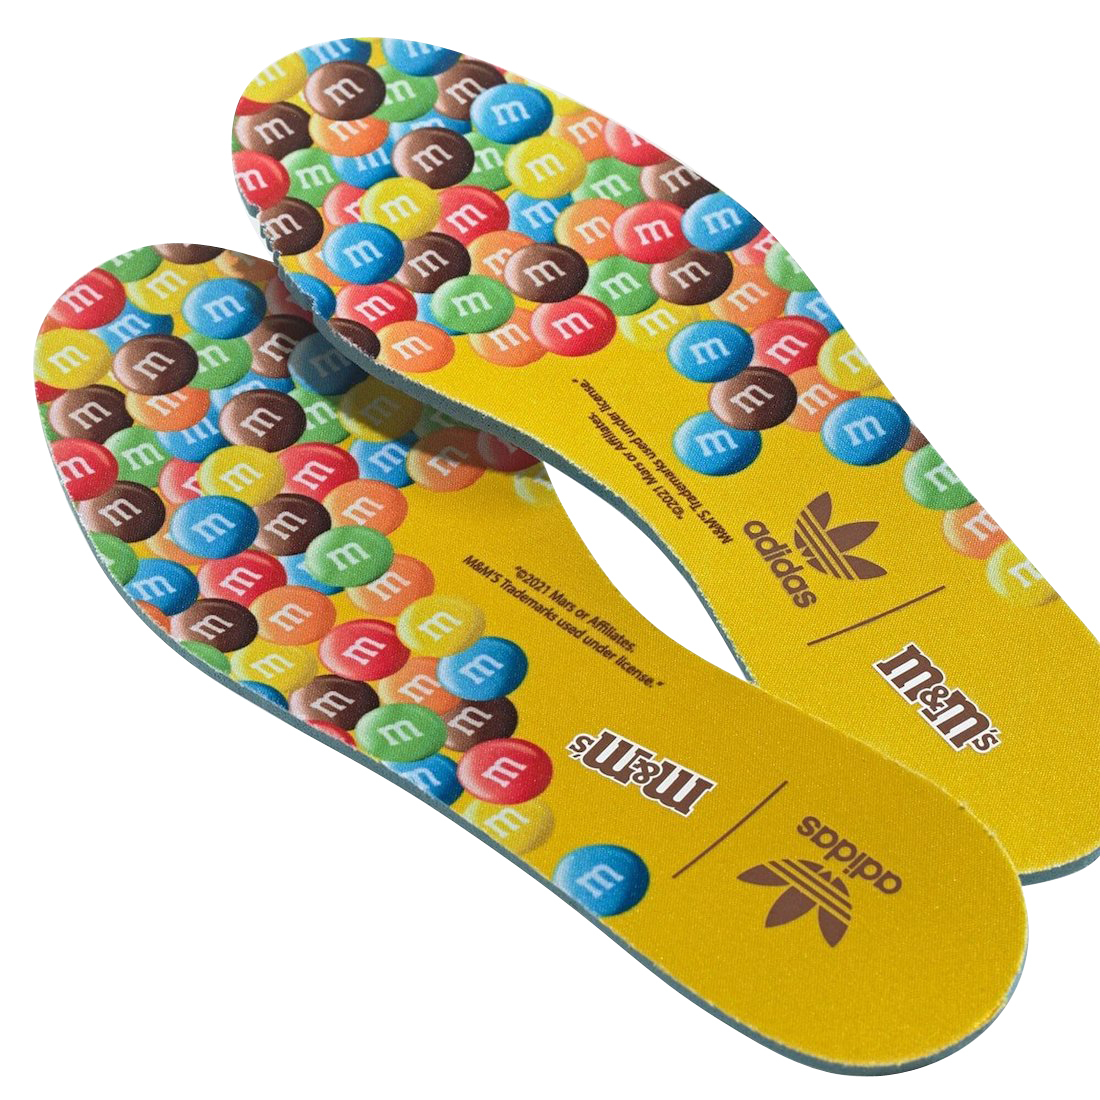 M&M’s x adidas Forum 84 Low Yellow Brown GY1179